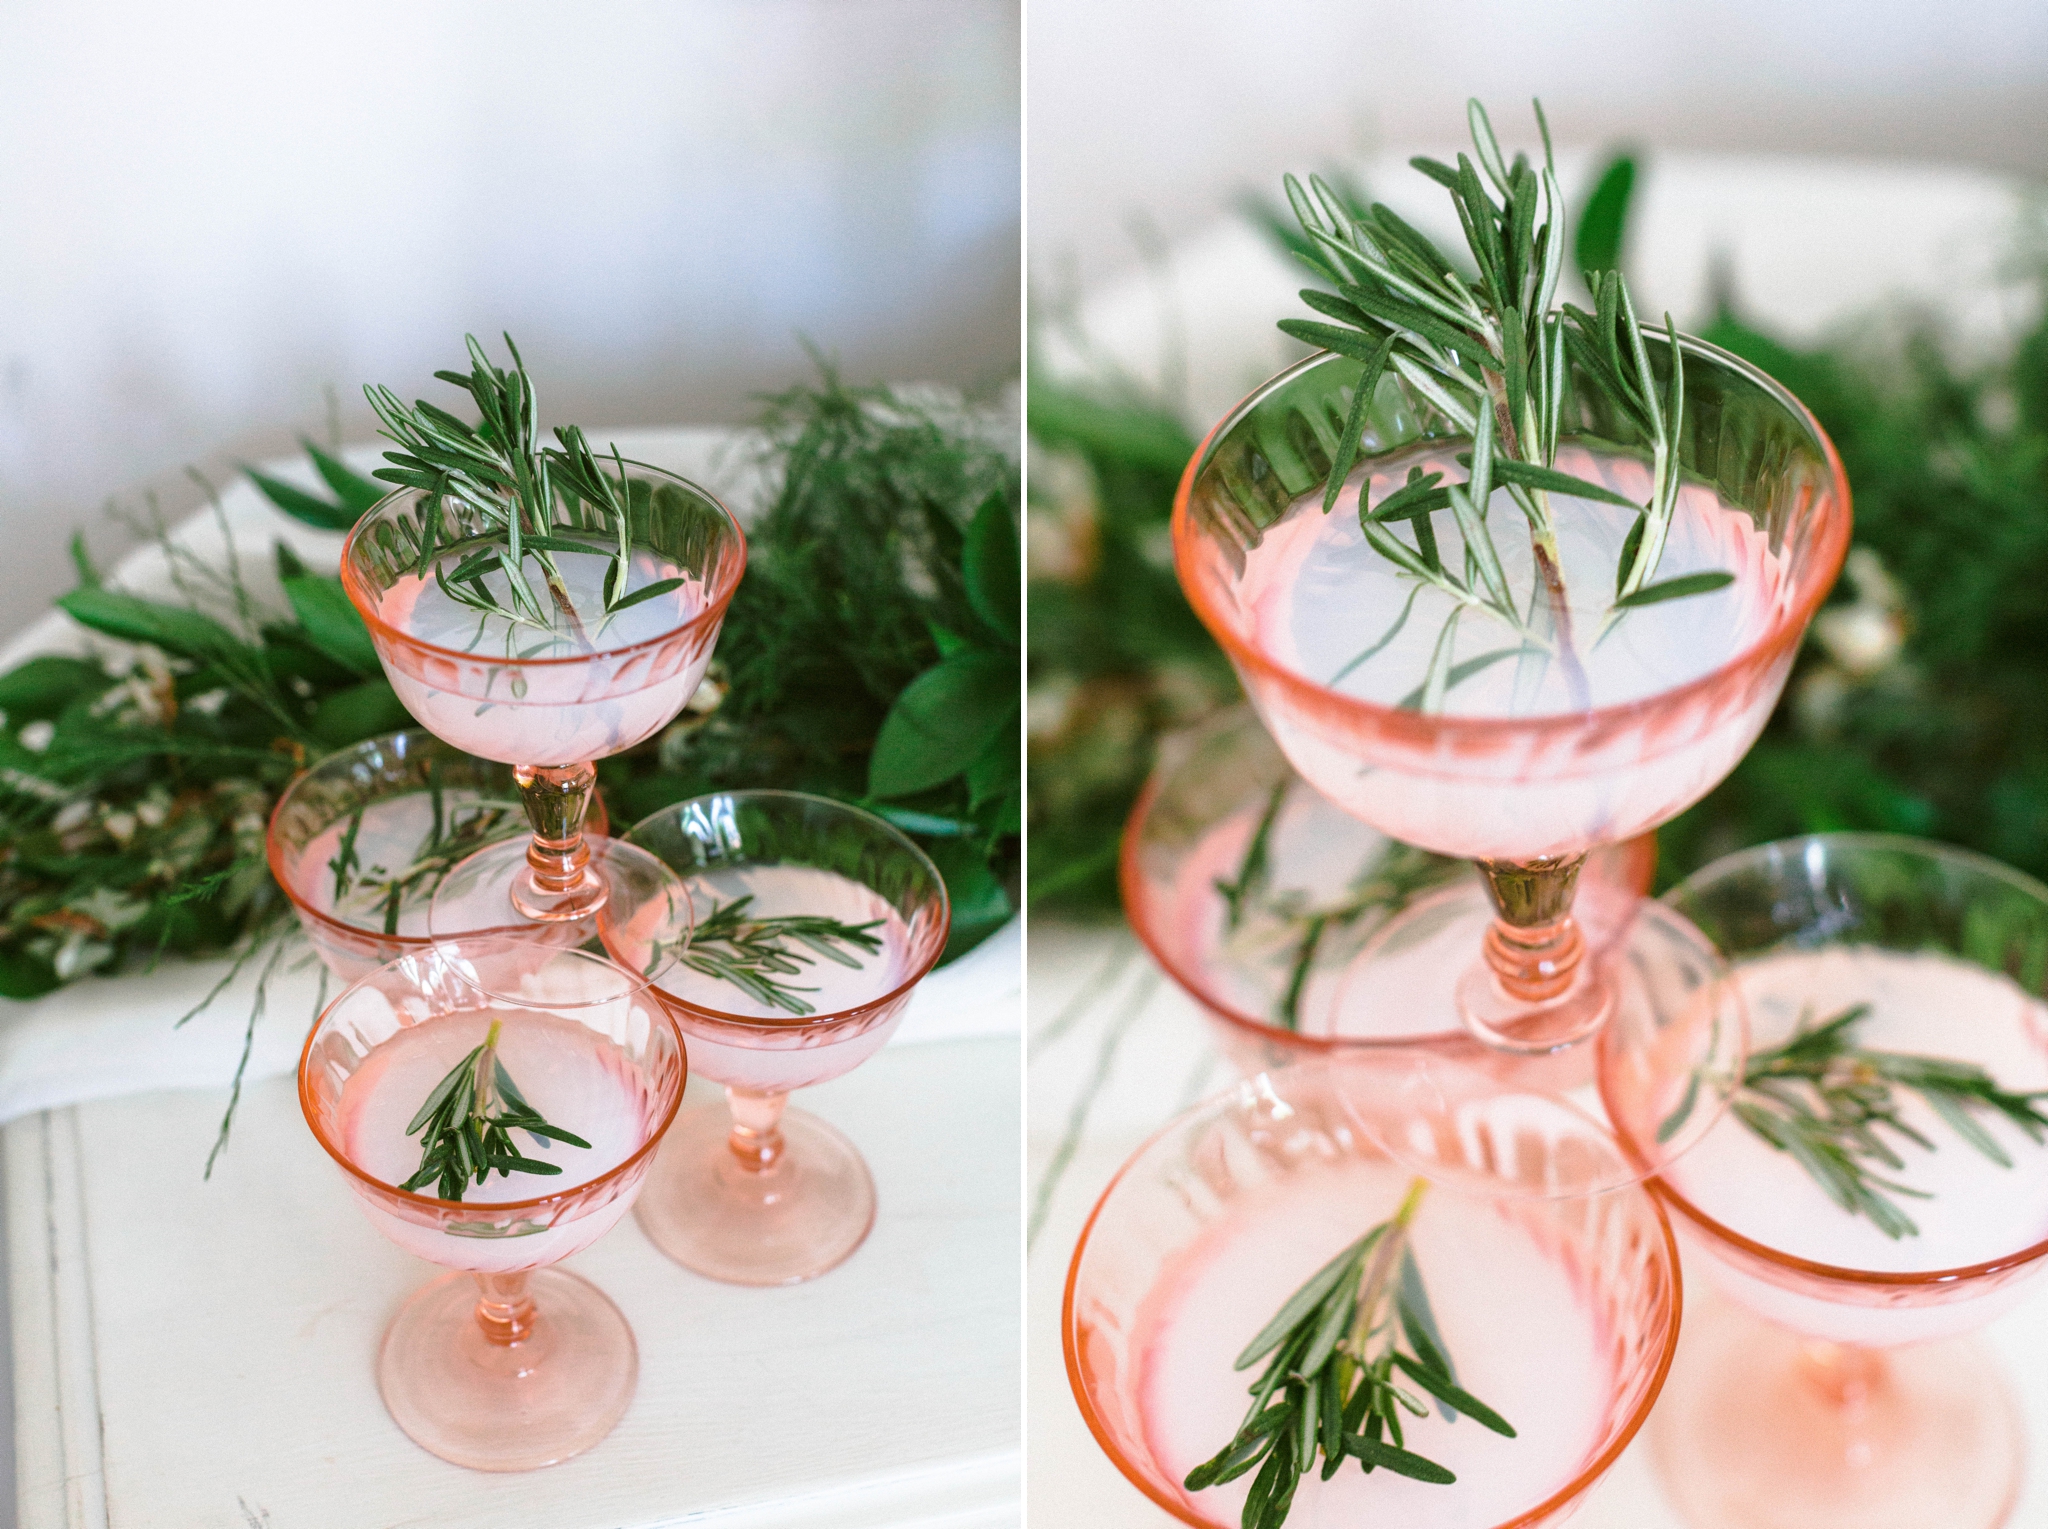  custom wedding cocktails in pink glasses with thyme - wedding cake table on an all white antique dresser - luxury cake table inspiration - honolulu oahu hawaii wedding photographer - johanna dye photography 